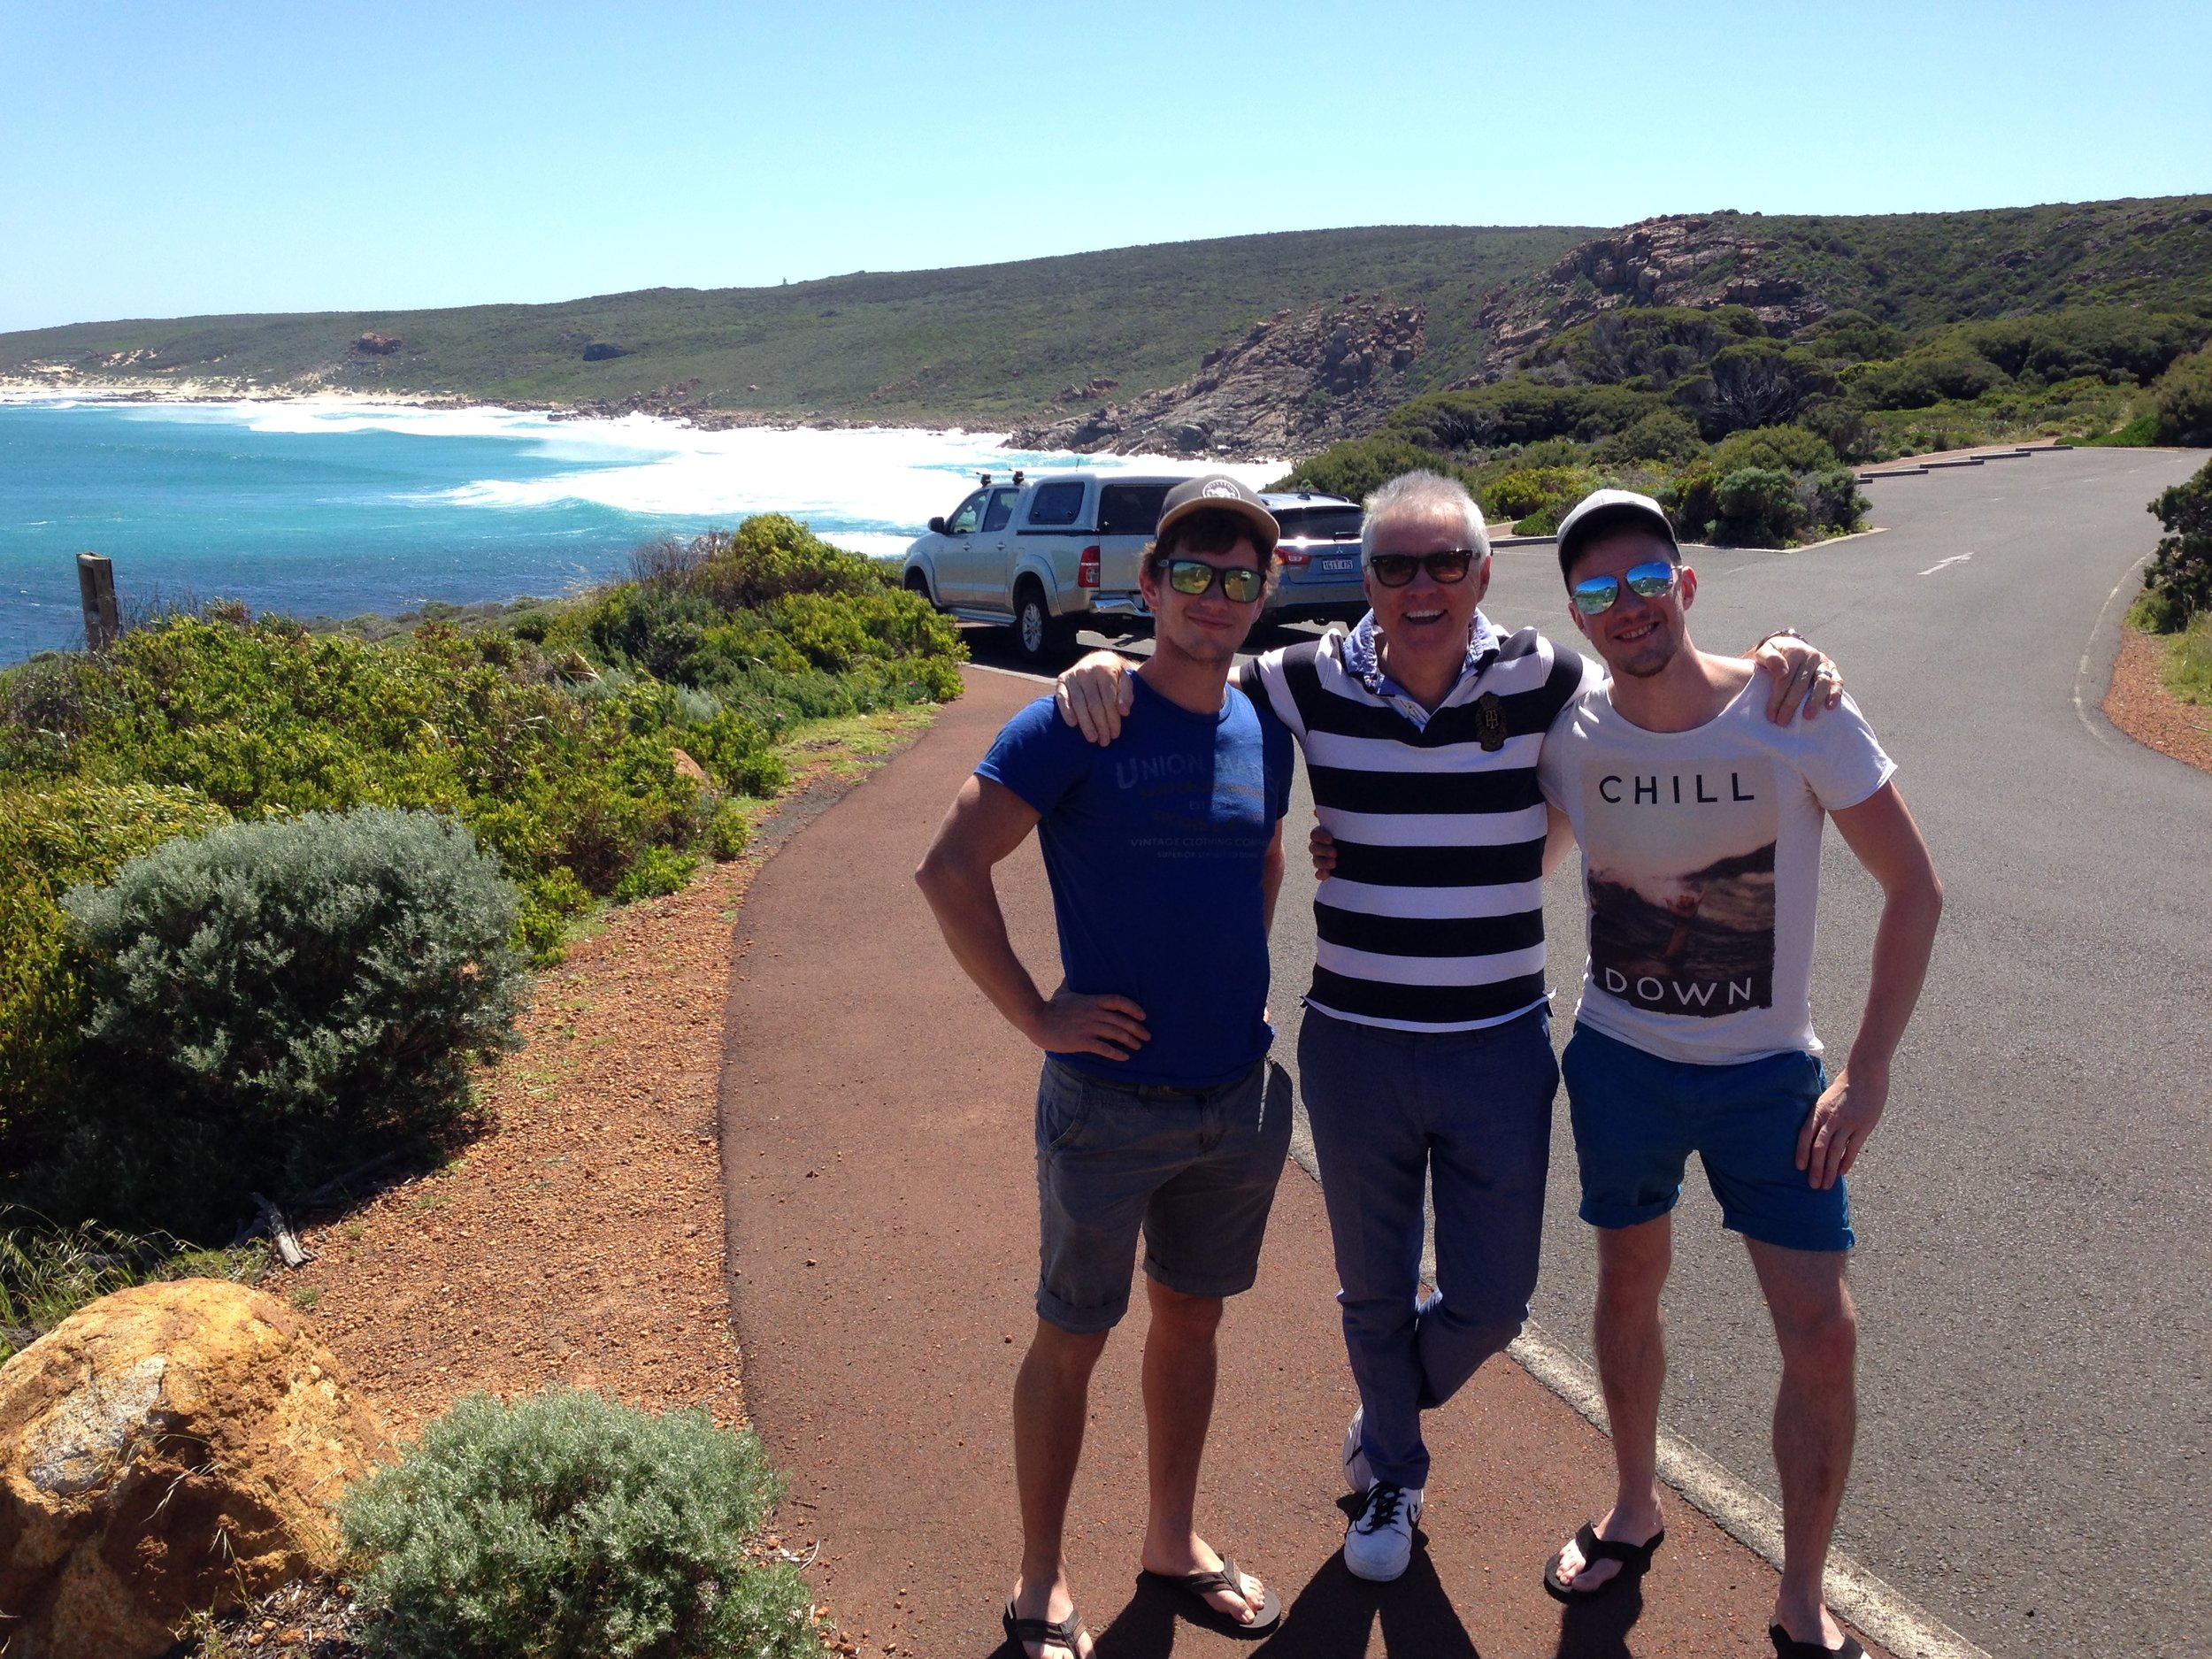 PB & the 2 young lads at SUGARLOAF  SUMMER DAY.JPG